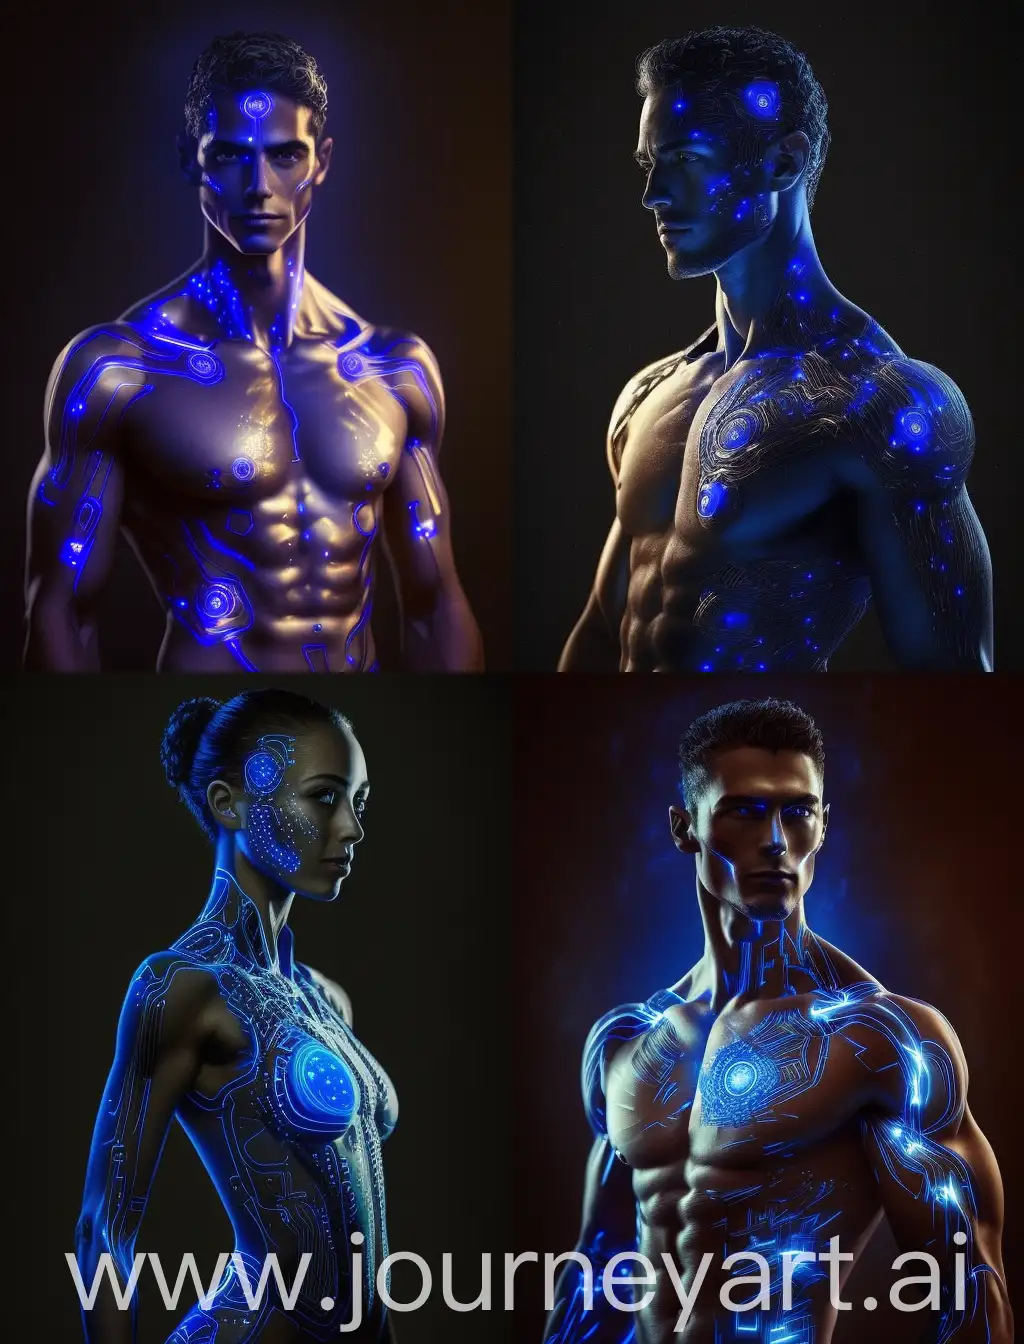 human-like android designed as a sports partner, skin is made up of a synthetic fluid that covers the body. On their right temple, they bear a circular small LED that visibly identifies them as androids and lights up in blue.
